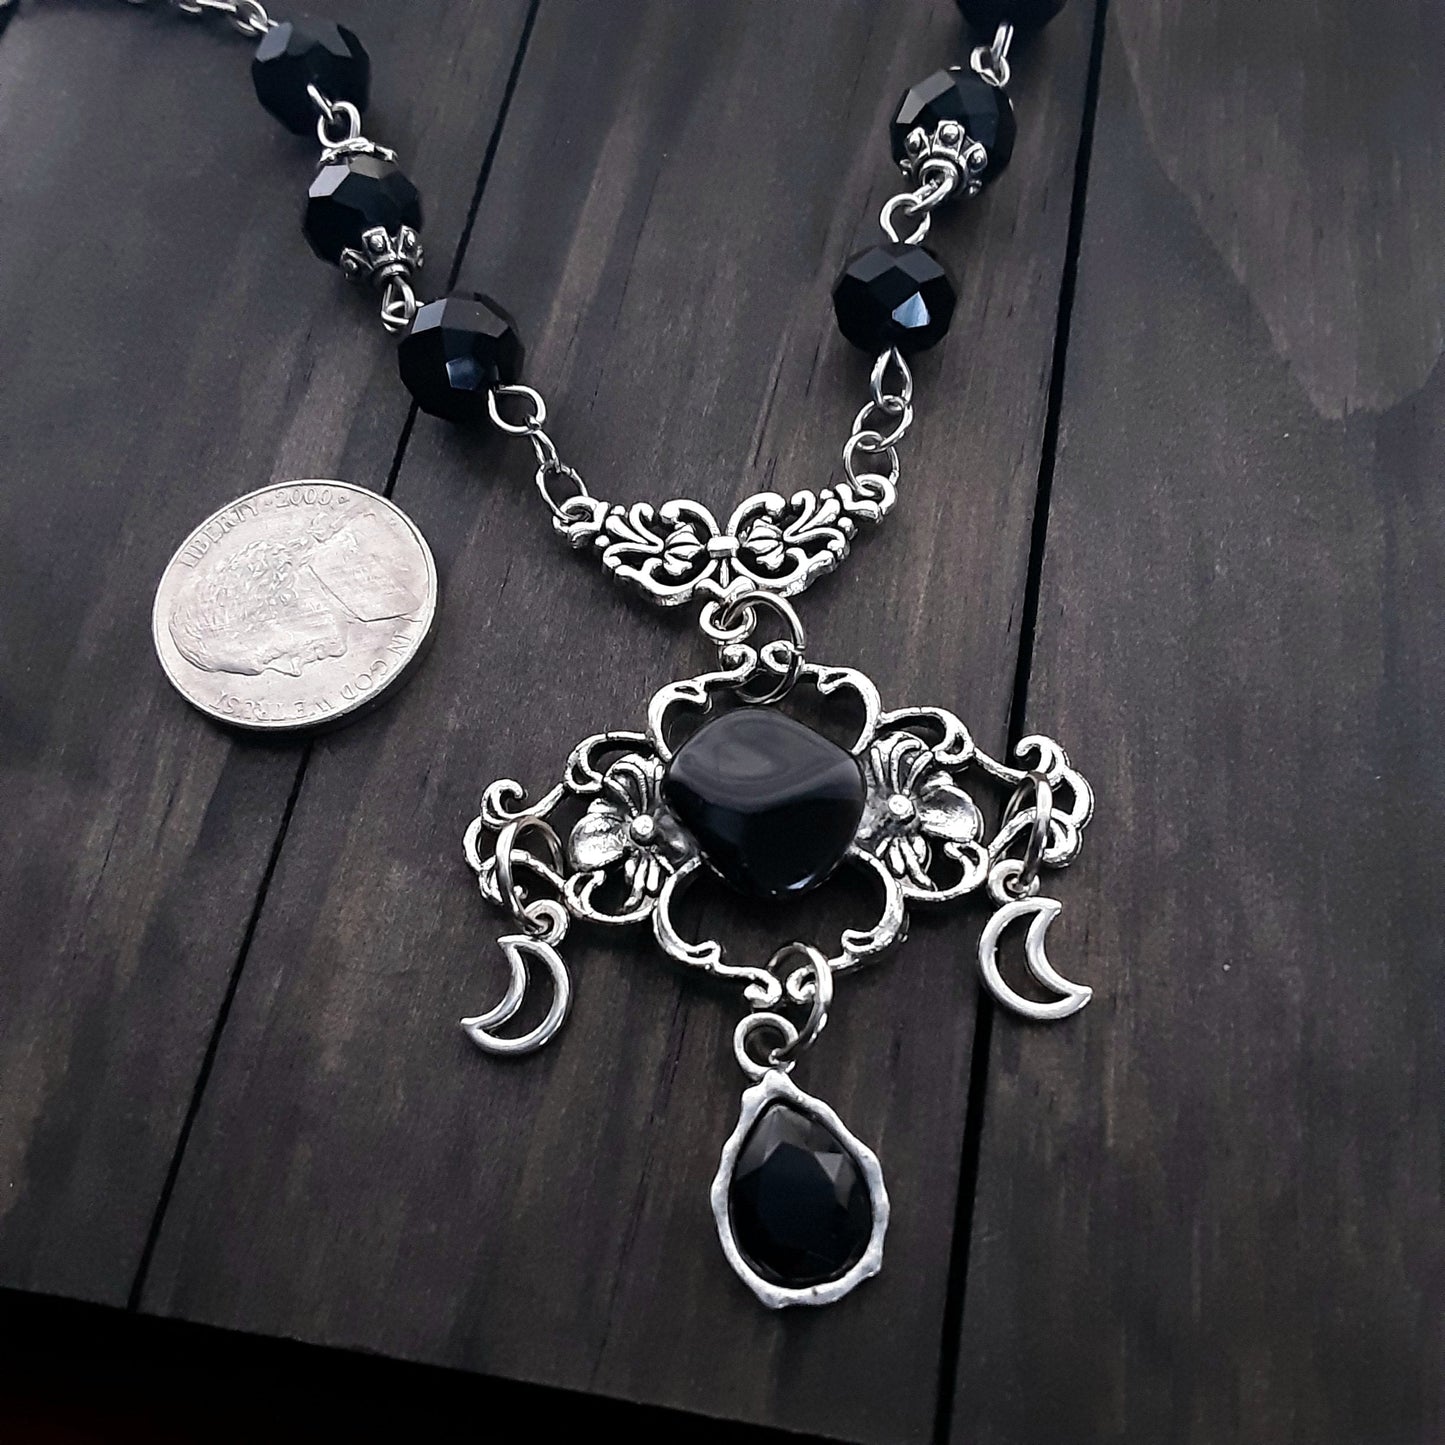 Gothic necklace with Obsidian and Moons Witchy style jewelry